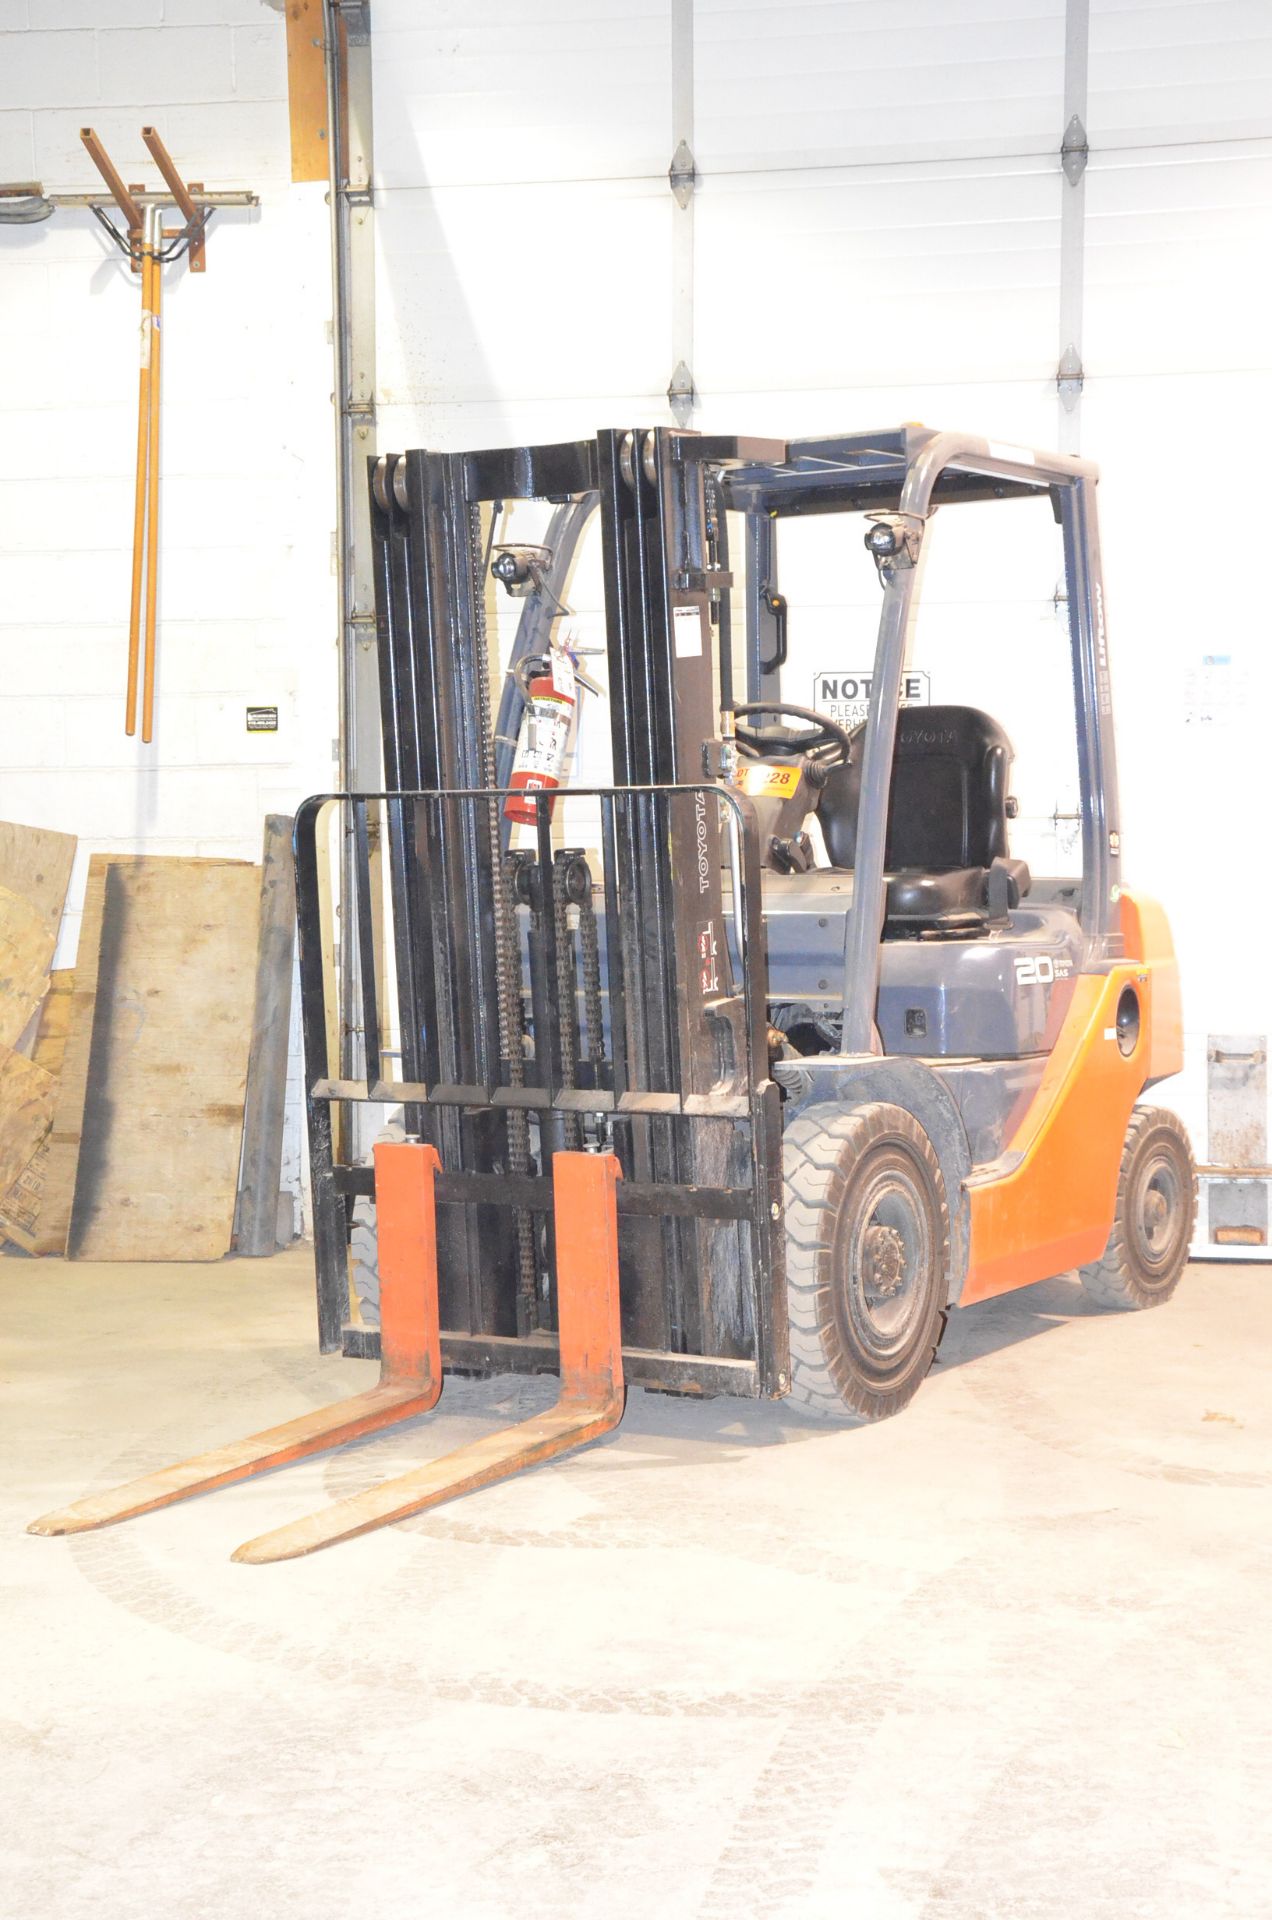 TOYOTA (2019) 8FGU20 GASOLINE POWERED FORKLIFT WITH 4,000 LBS CAPACITY, 170" MAX VERTICAL REACH, 3-